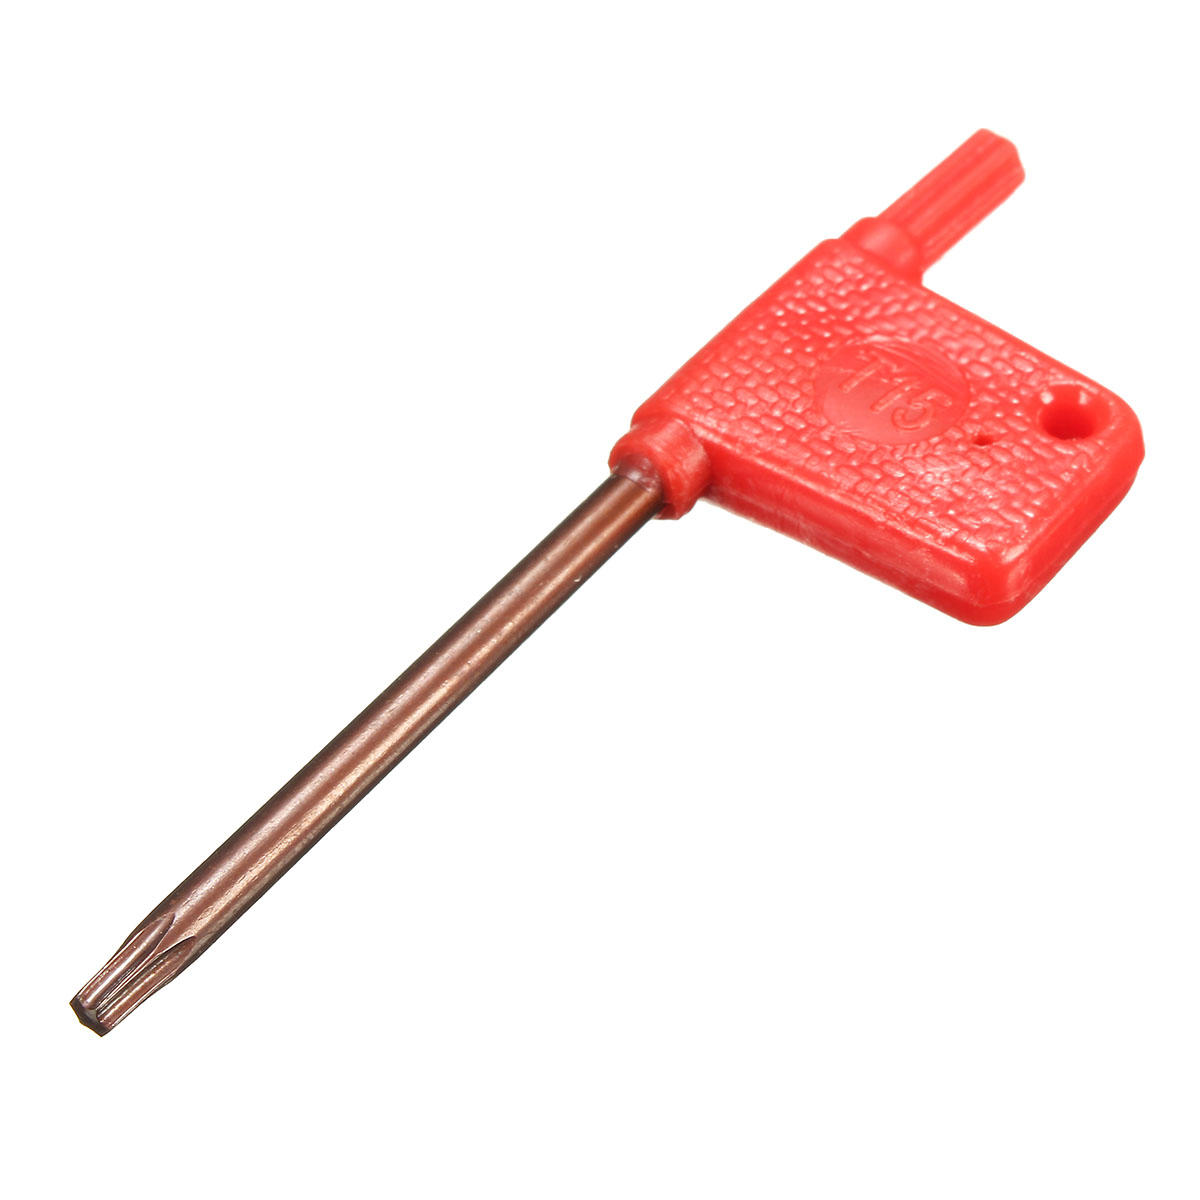 T15 Wrench Flag Torx Spanner for CNC Lathe Turning Tool